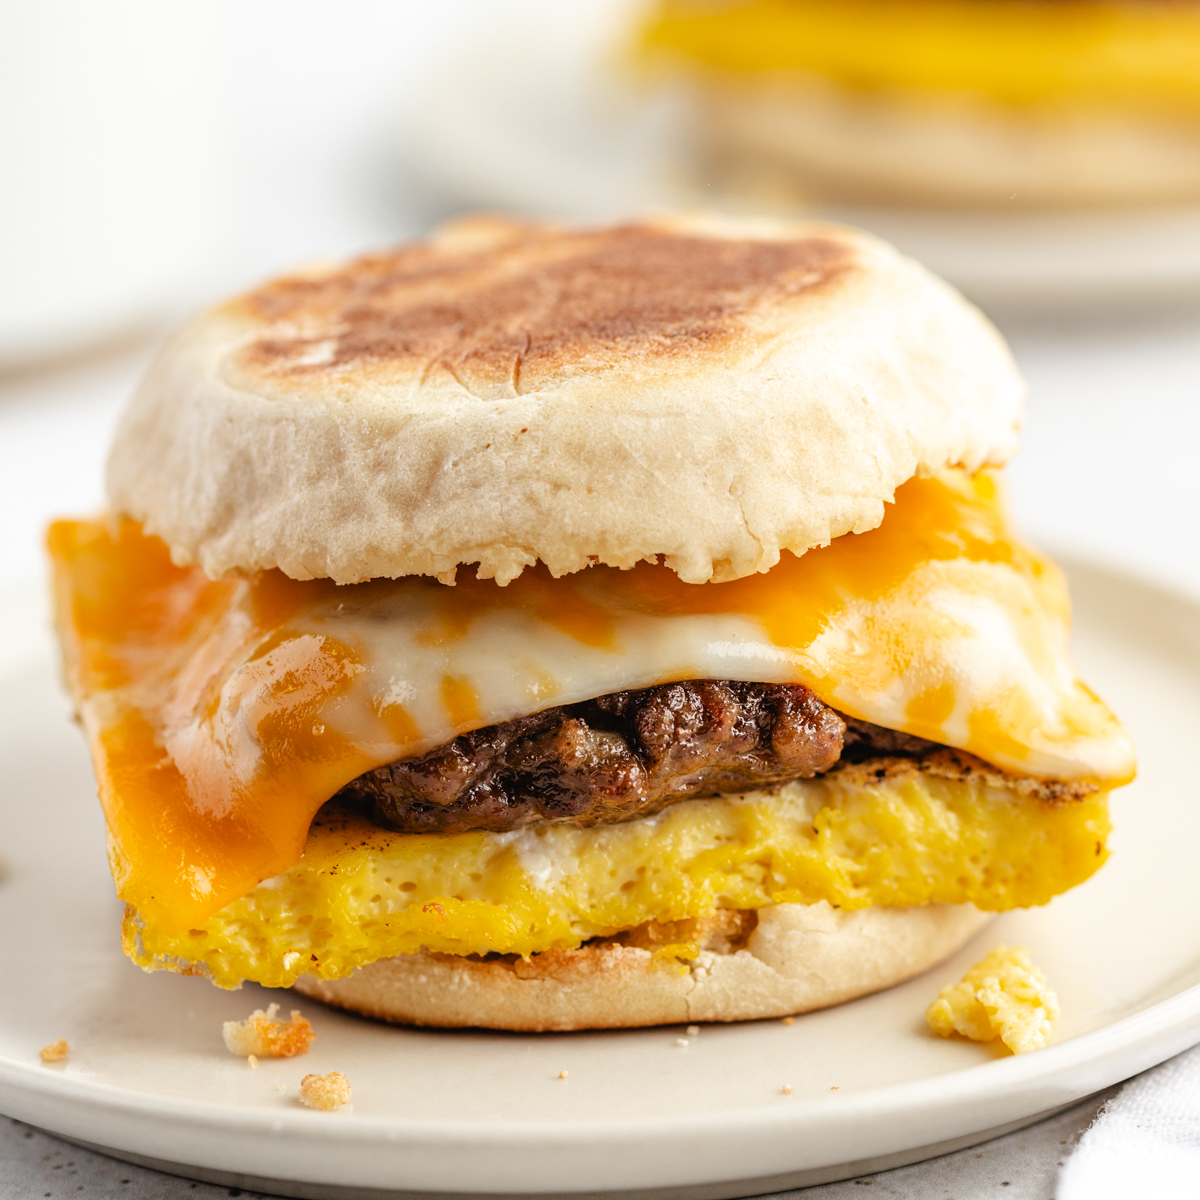 Venison Breakfast Sandwich with English muffin, egg, venison sausage patty and cheese